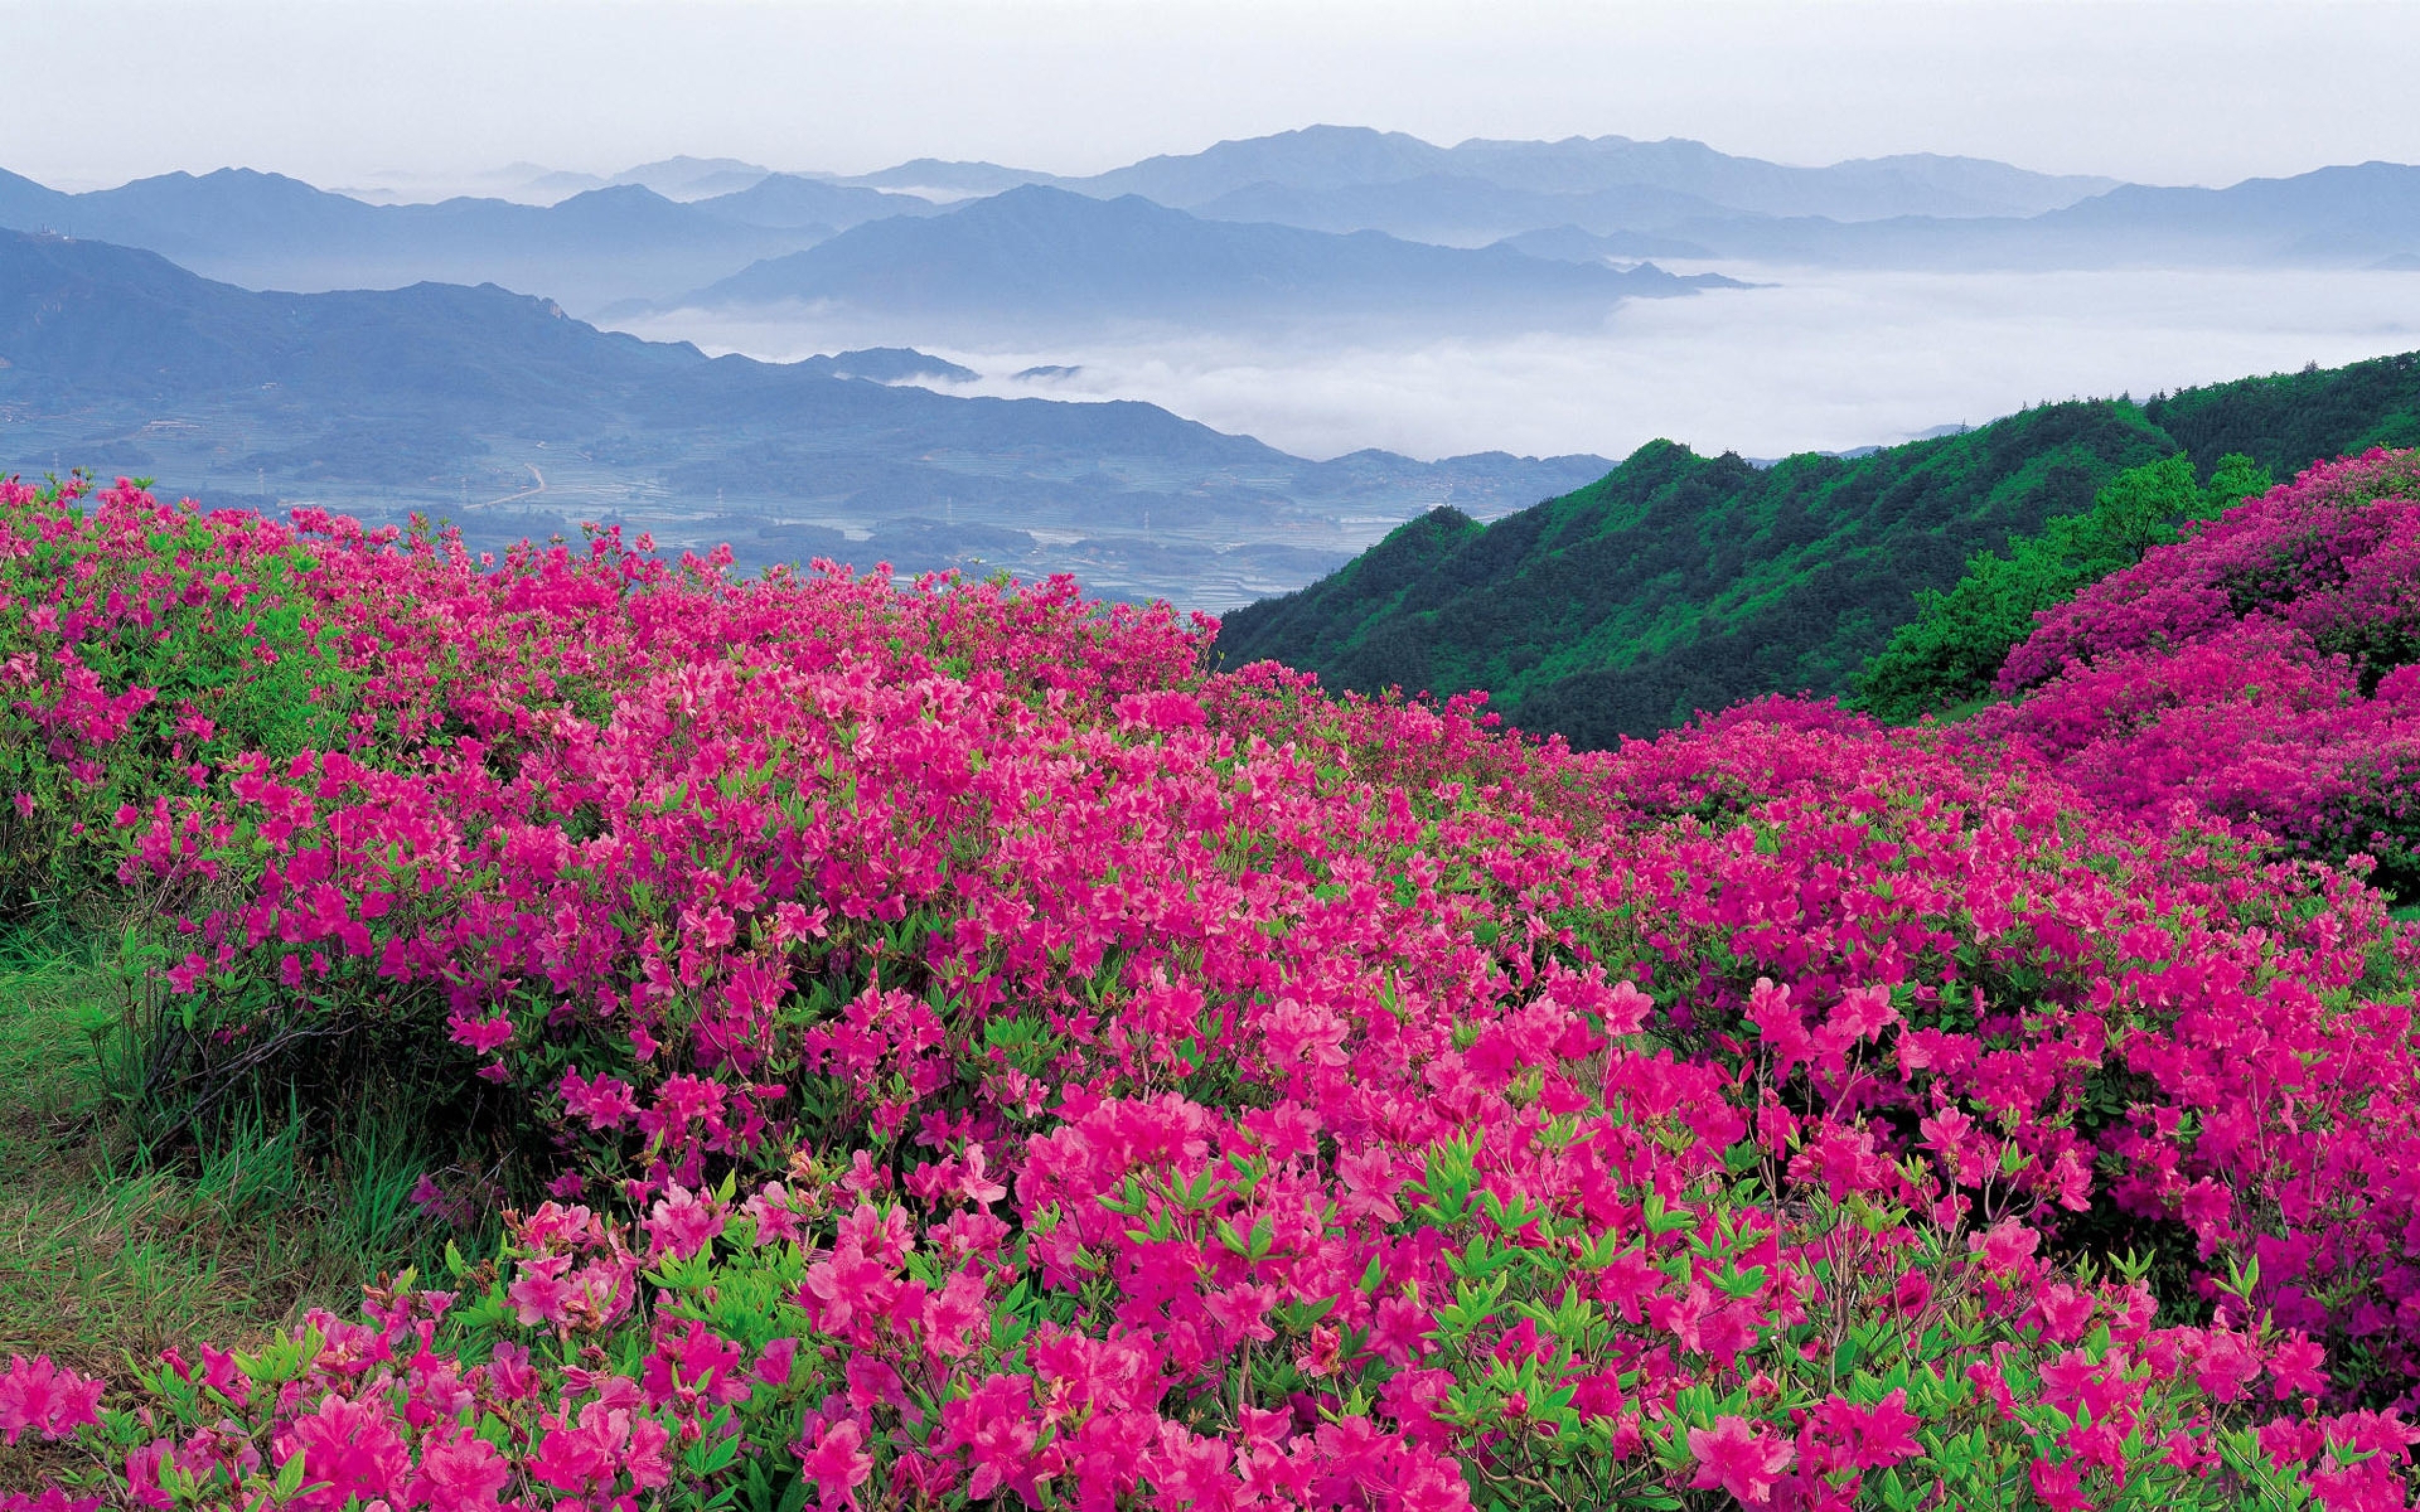 Nature Landscape Mountainous Pink Flowers And Green Forest Horizon With Distant Mountains Fog Hd Wallpaper : Wallpapers13.com